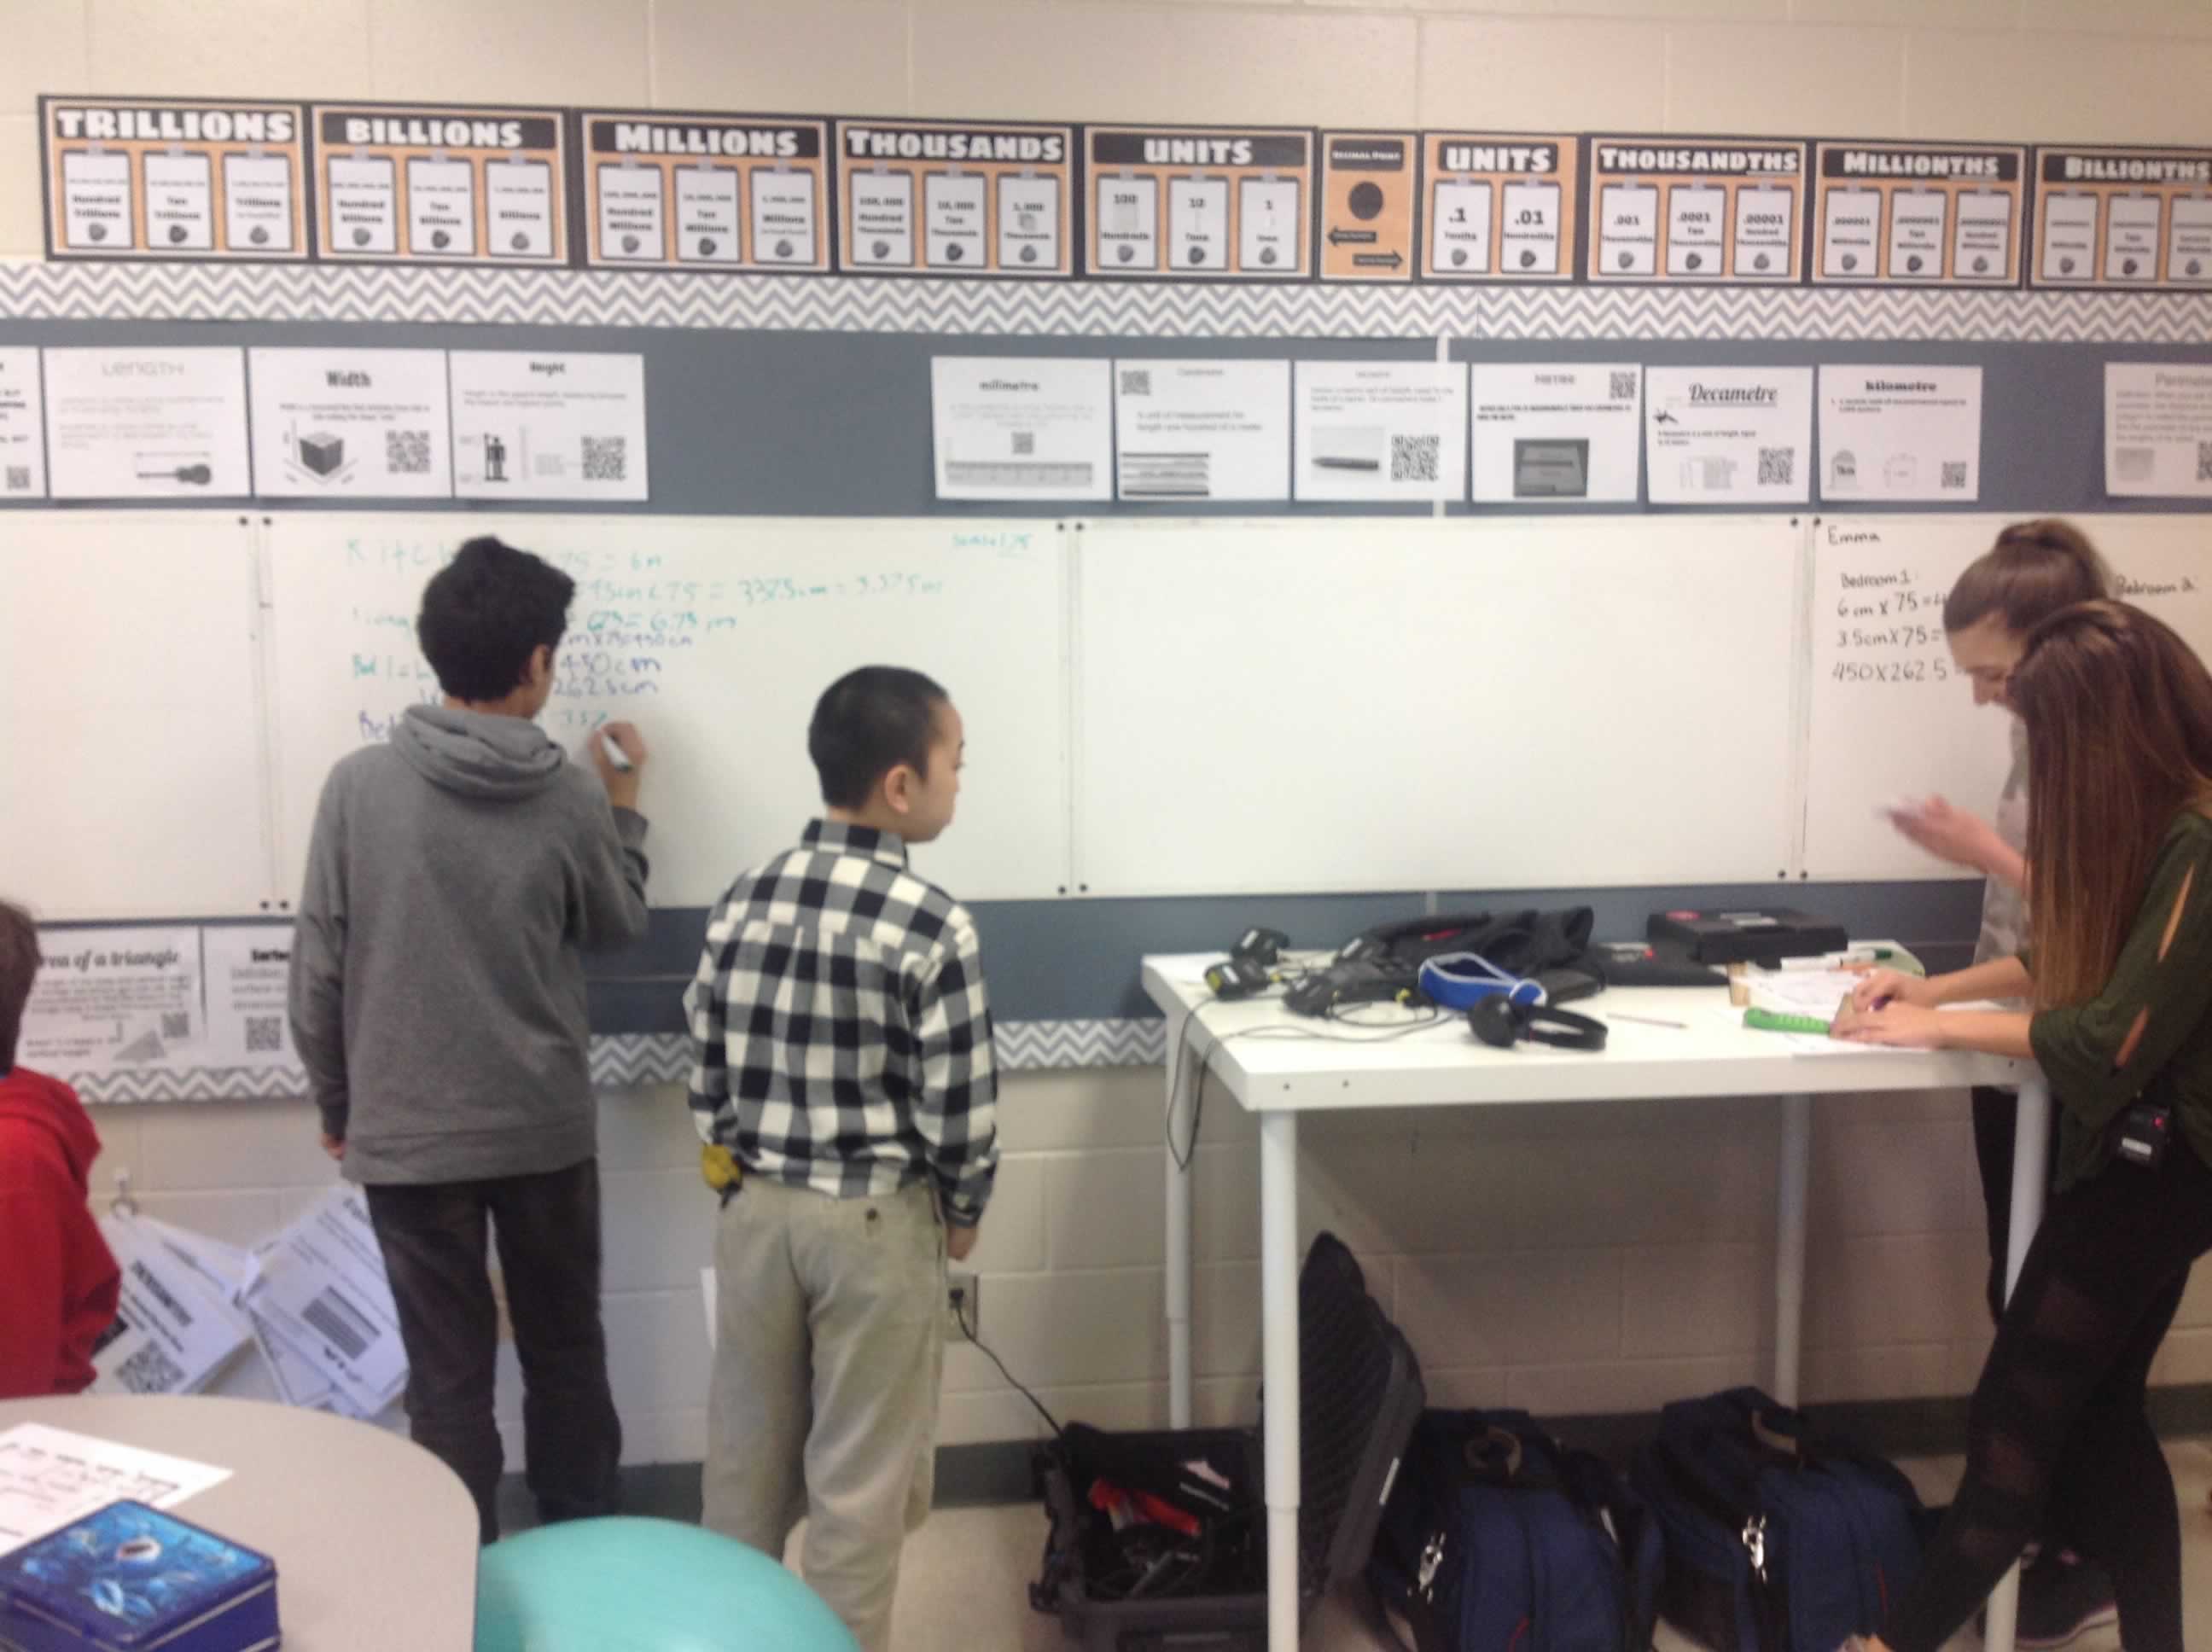 this is an image of students working on a whiteboard